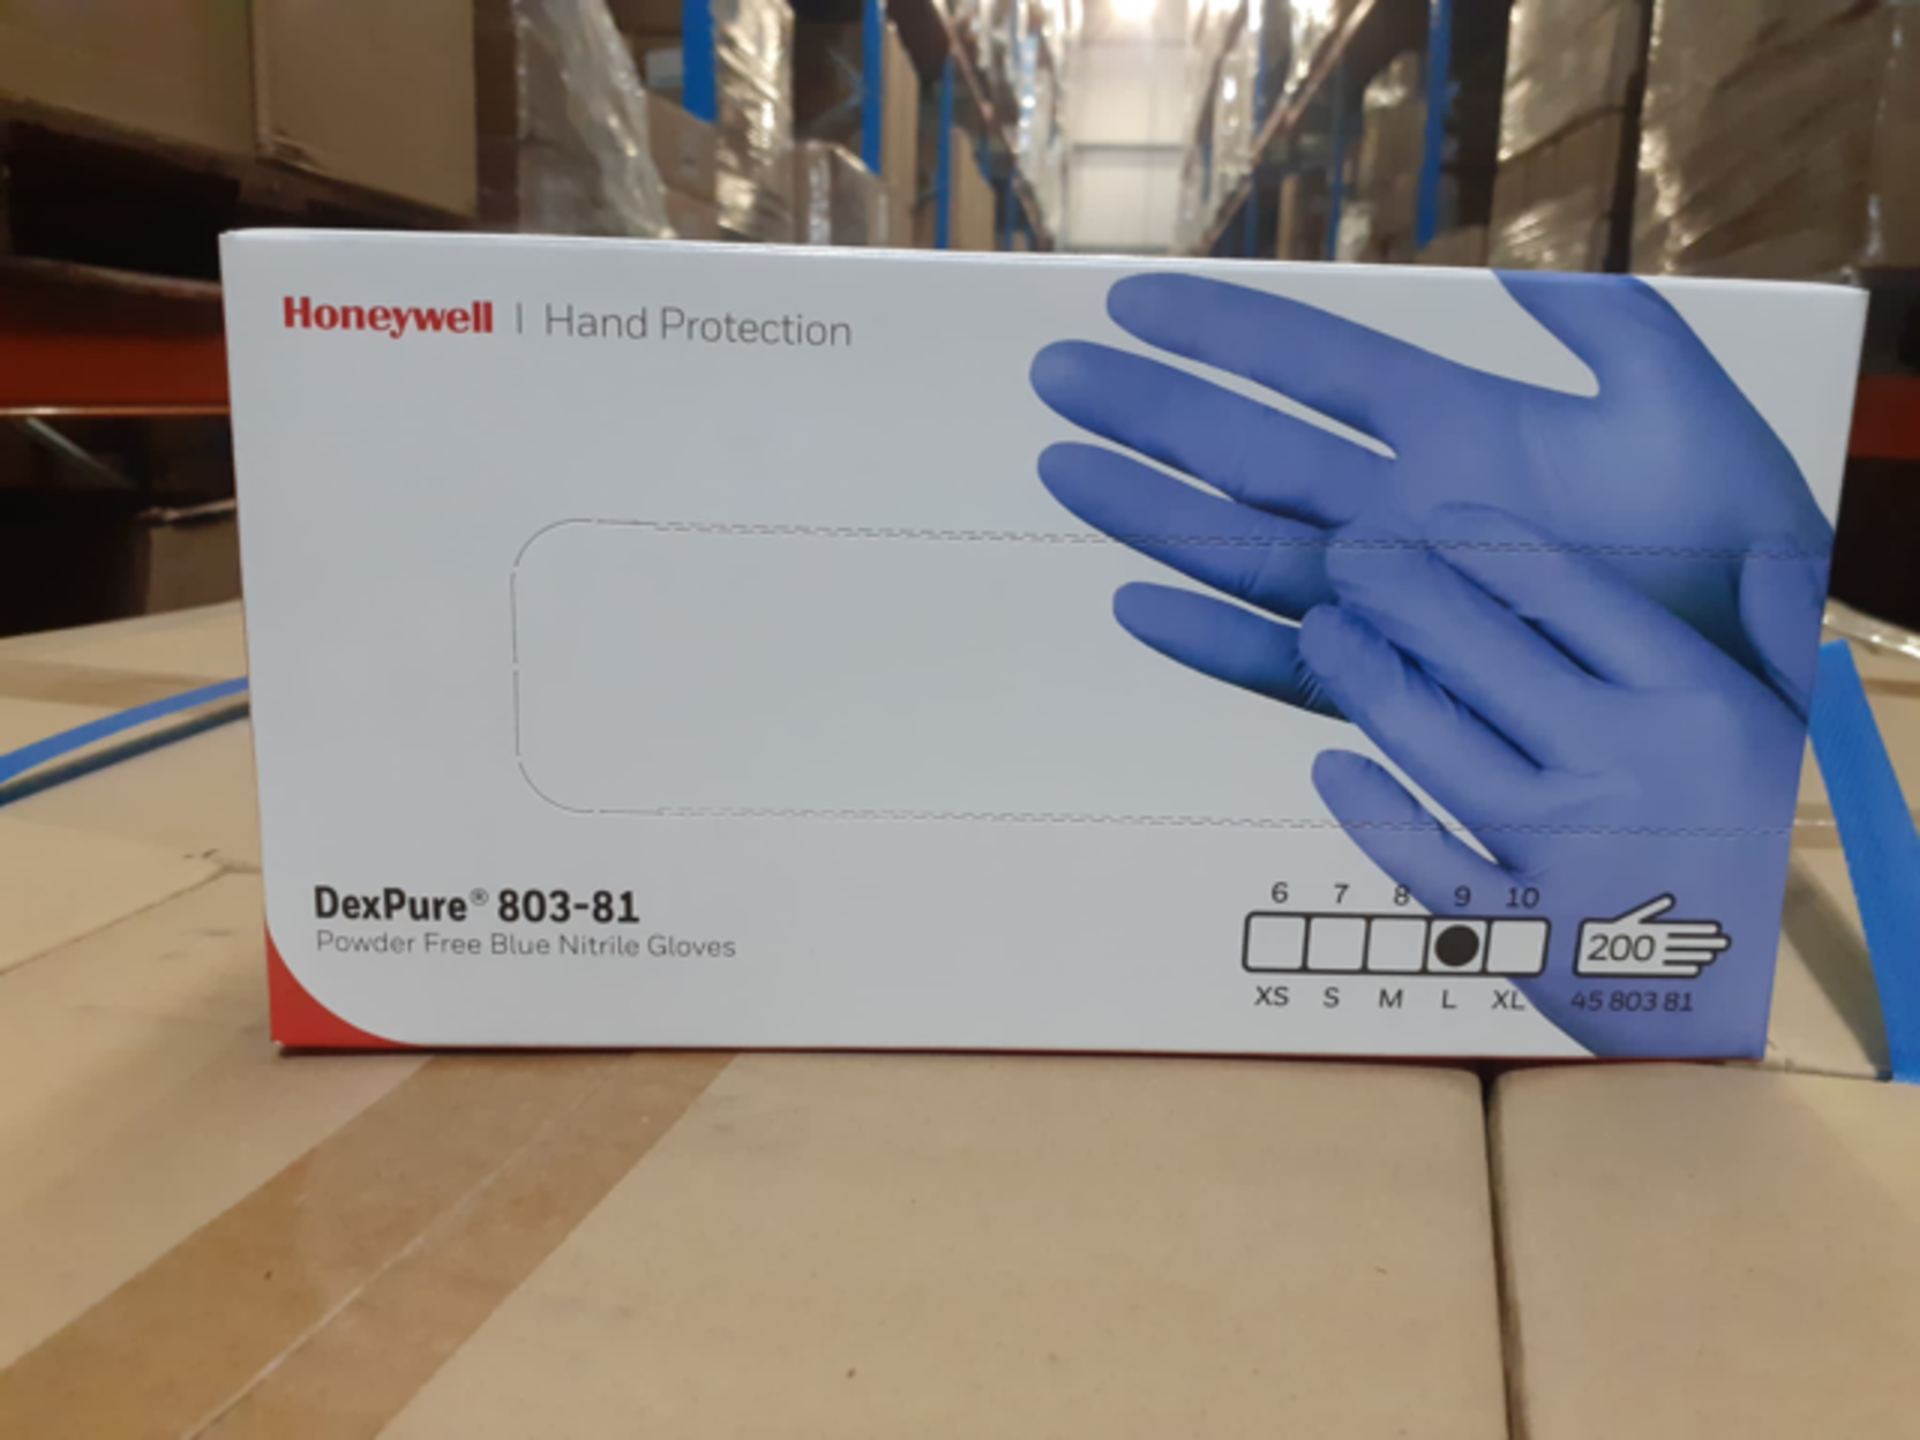 540 X BRAND NEW PACKS OF 200 HONEYWELL DEXPURE POWDER FREE BLUE NITRILE GLOVES SIZE SMALL EXP JUNE - Image 6 of 7